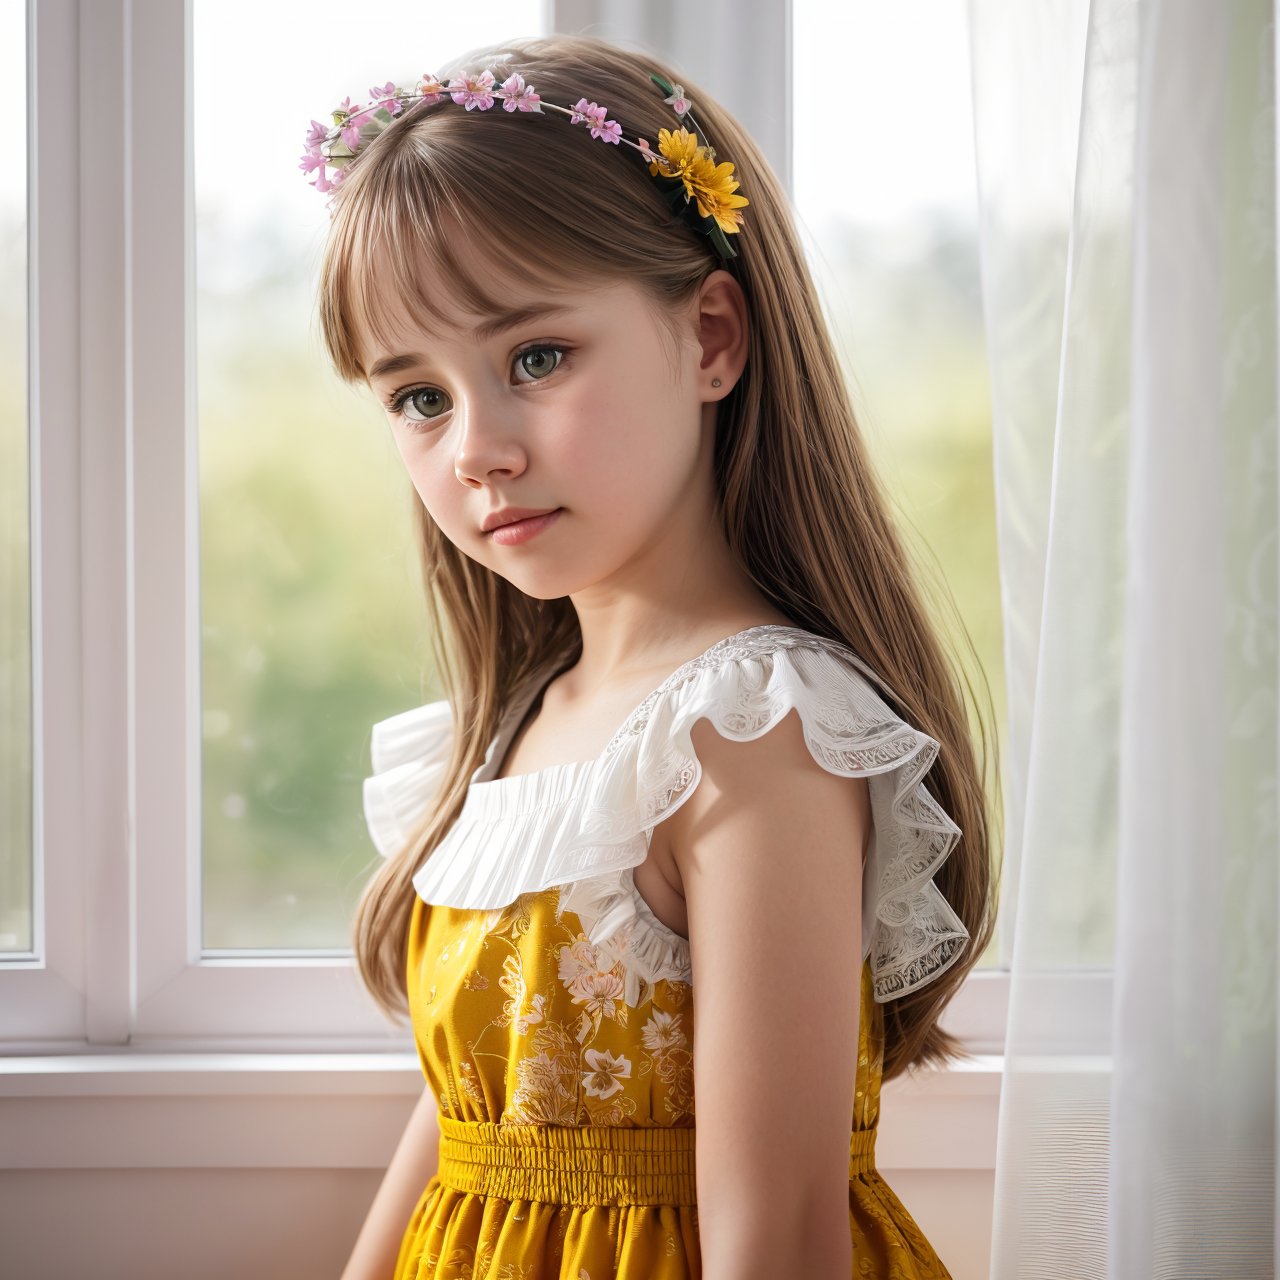 SFW, HD quality, HD, HQ, 4K, looking at viewer, portrait of innocent (AIDA_LoRA_HanF:1.16) <lora:AIDA_LoRA_HanF:0.91> in a dress with flower pattern and with a black bow posing for a picture in front of window, window covered with yellow curtains, backlight, young lady, pretty face, naughty, cinematic, studio photo, kkw-ph1, hdr, f1.5, getty images